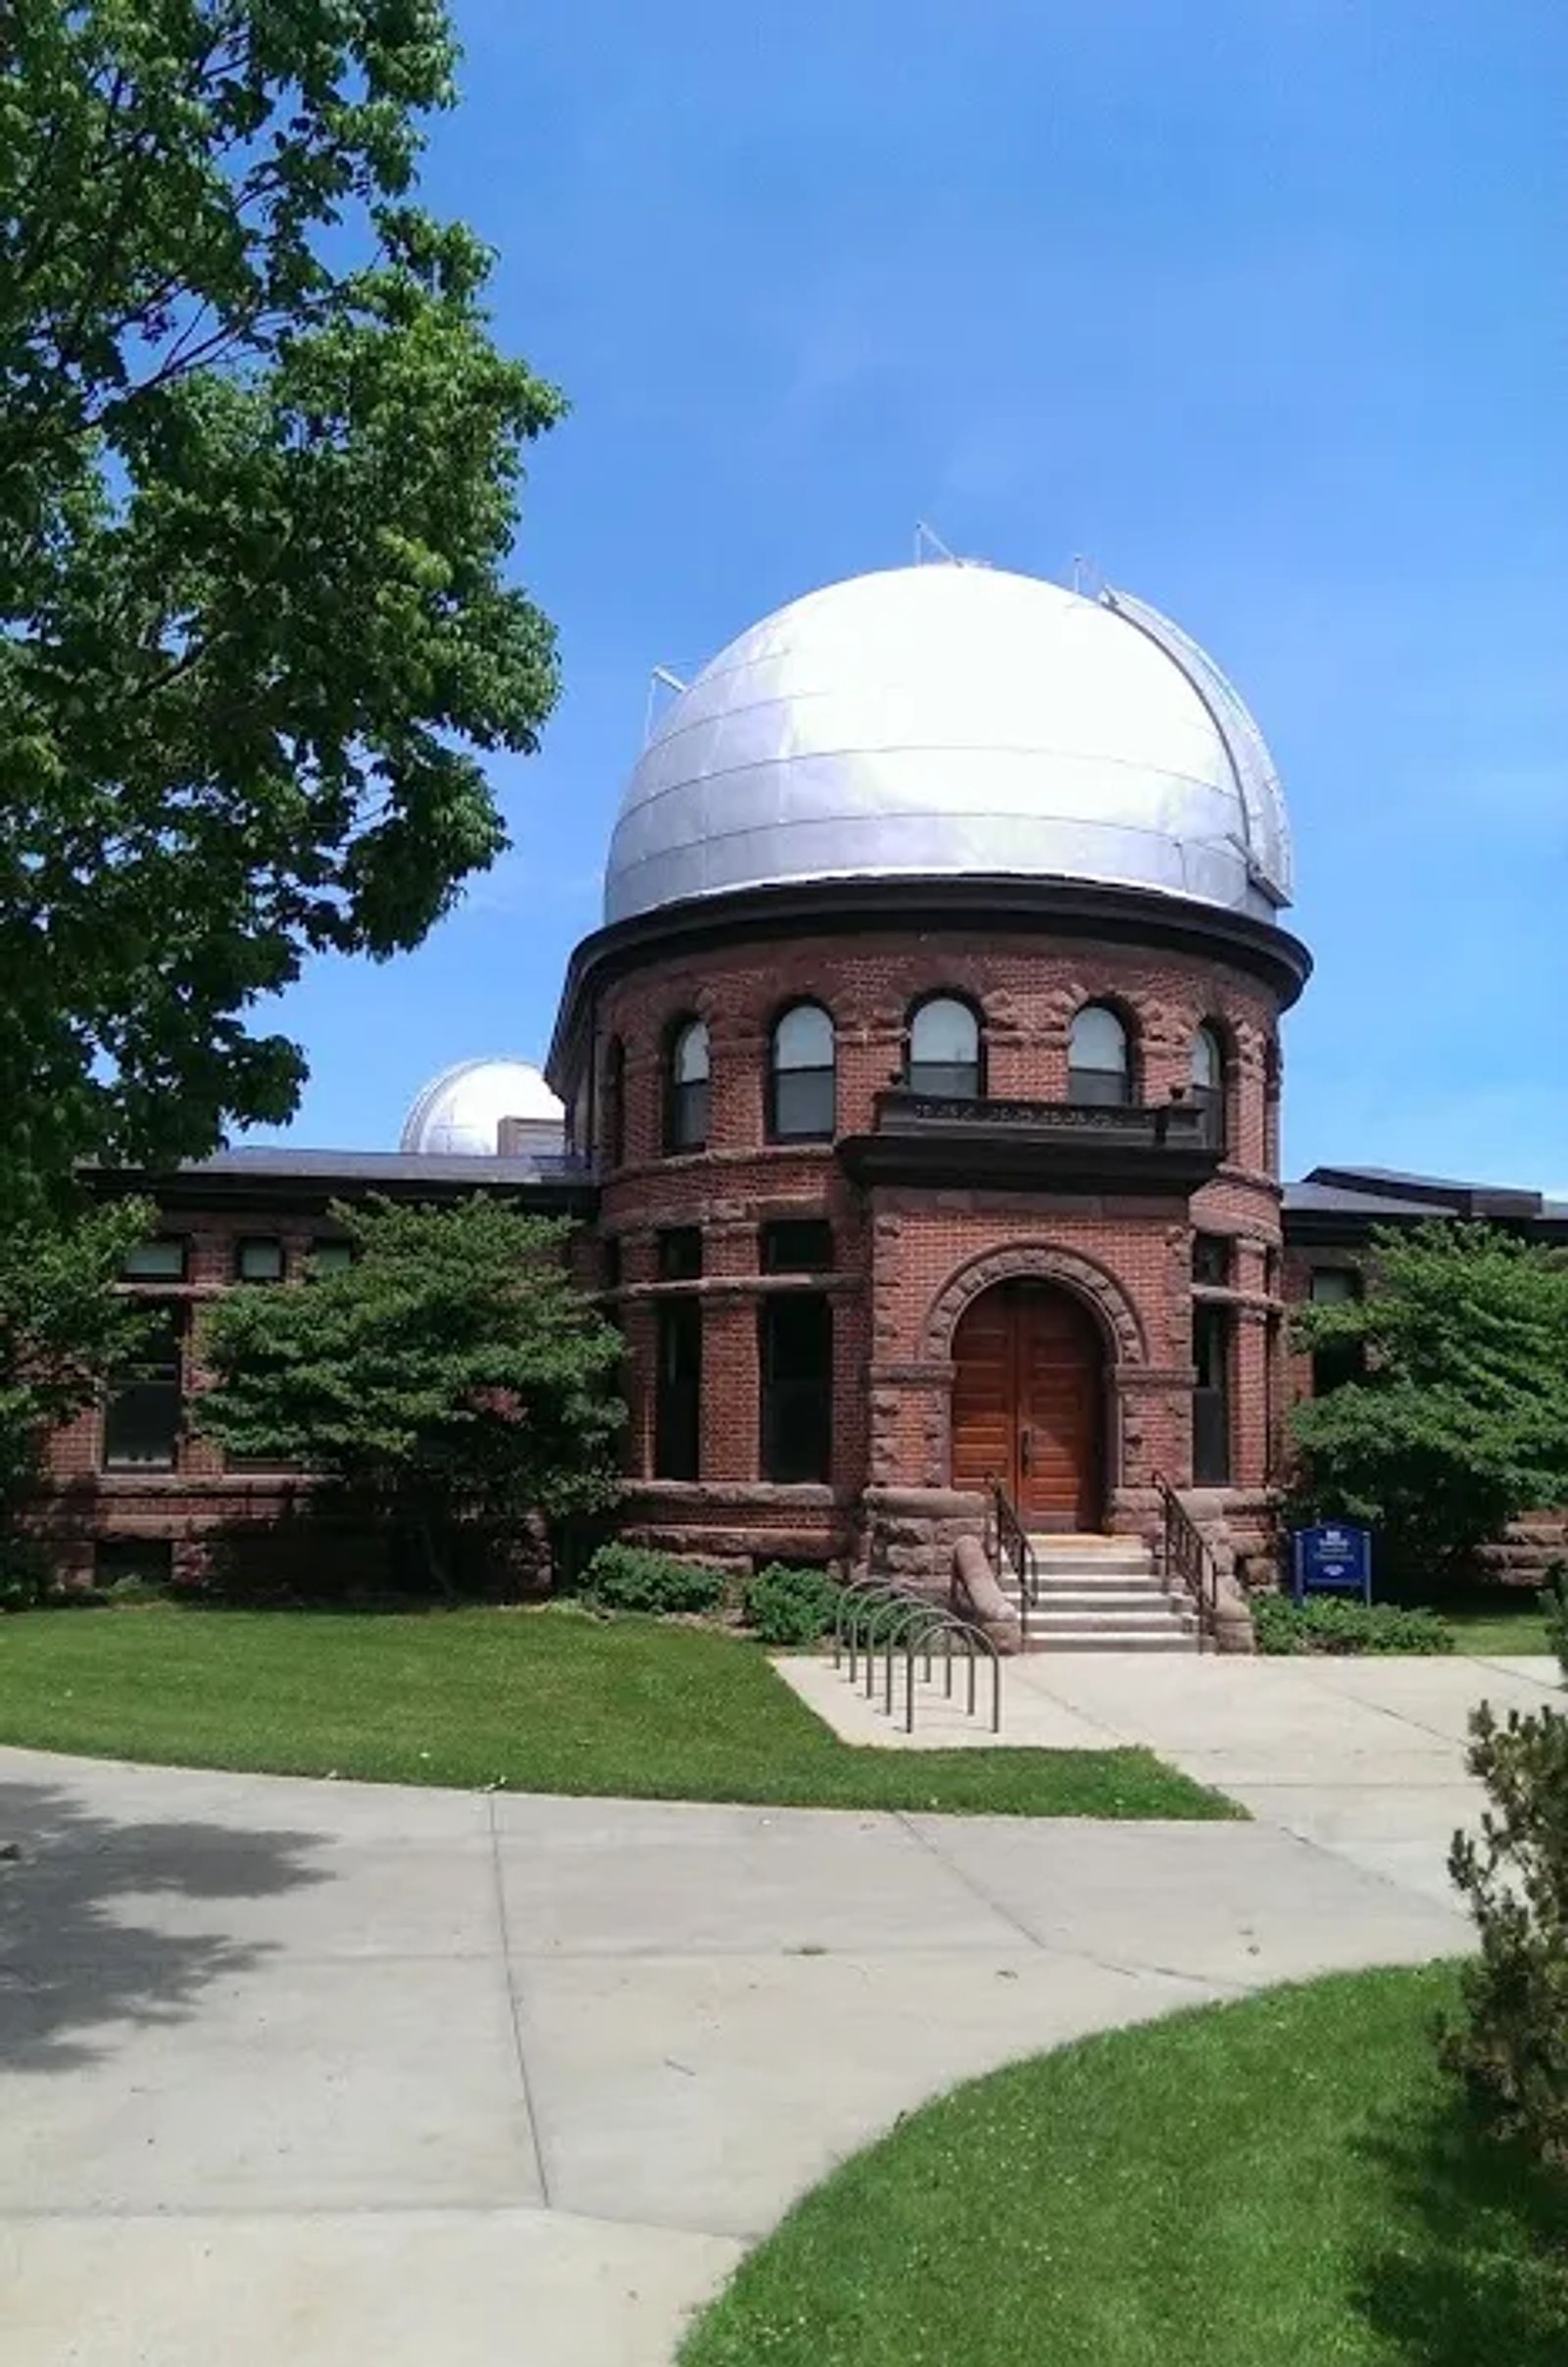 Photo of The Goodsell Observatory, at Carleton College in Northfield, Minnesota